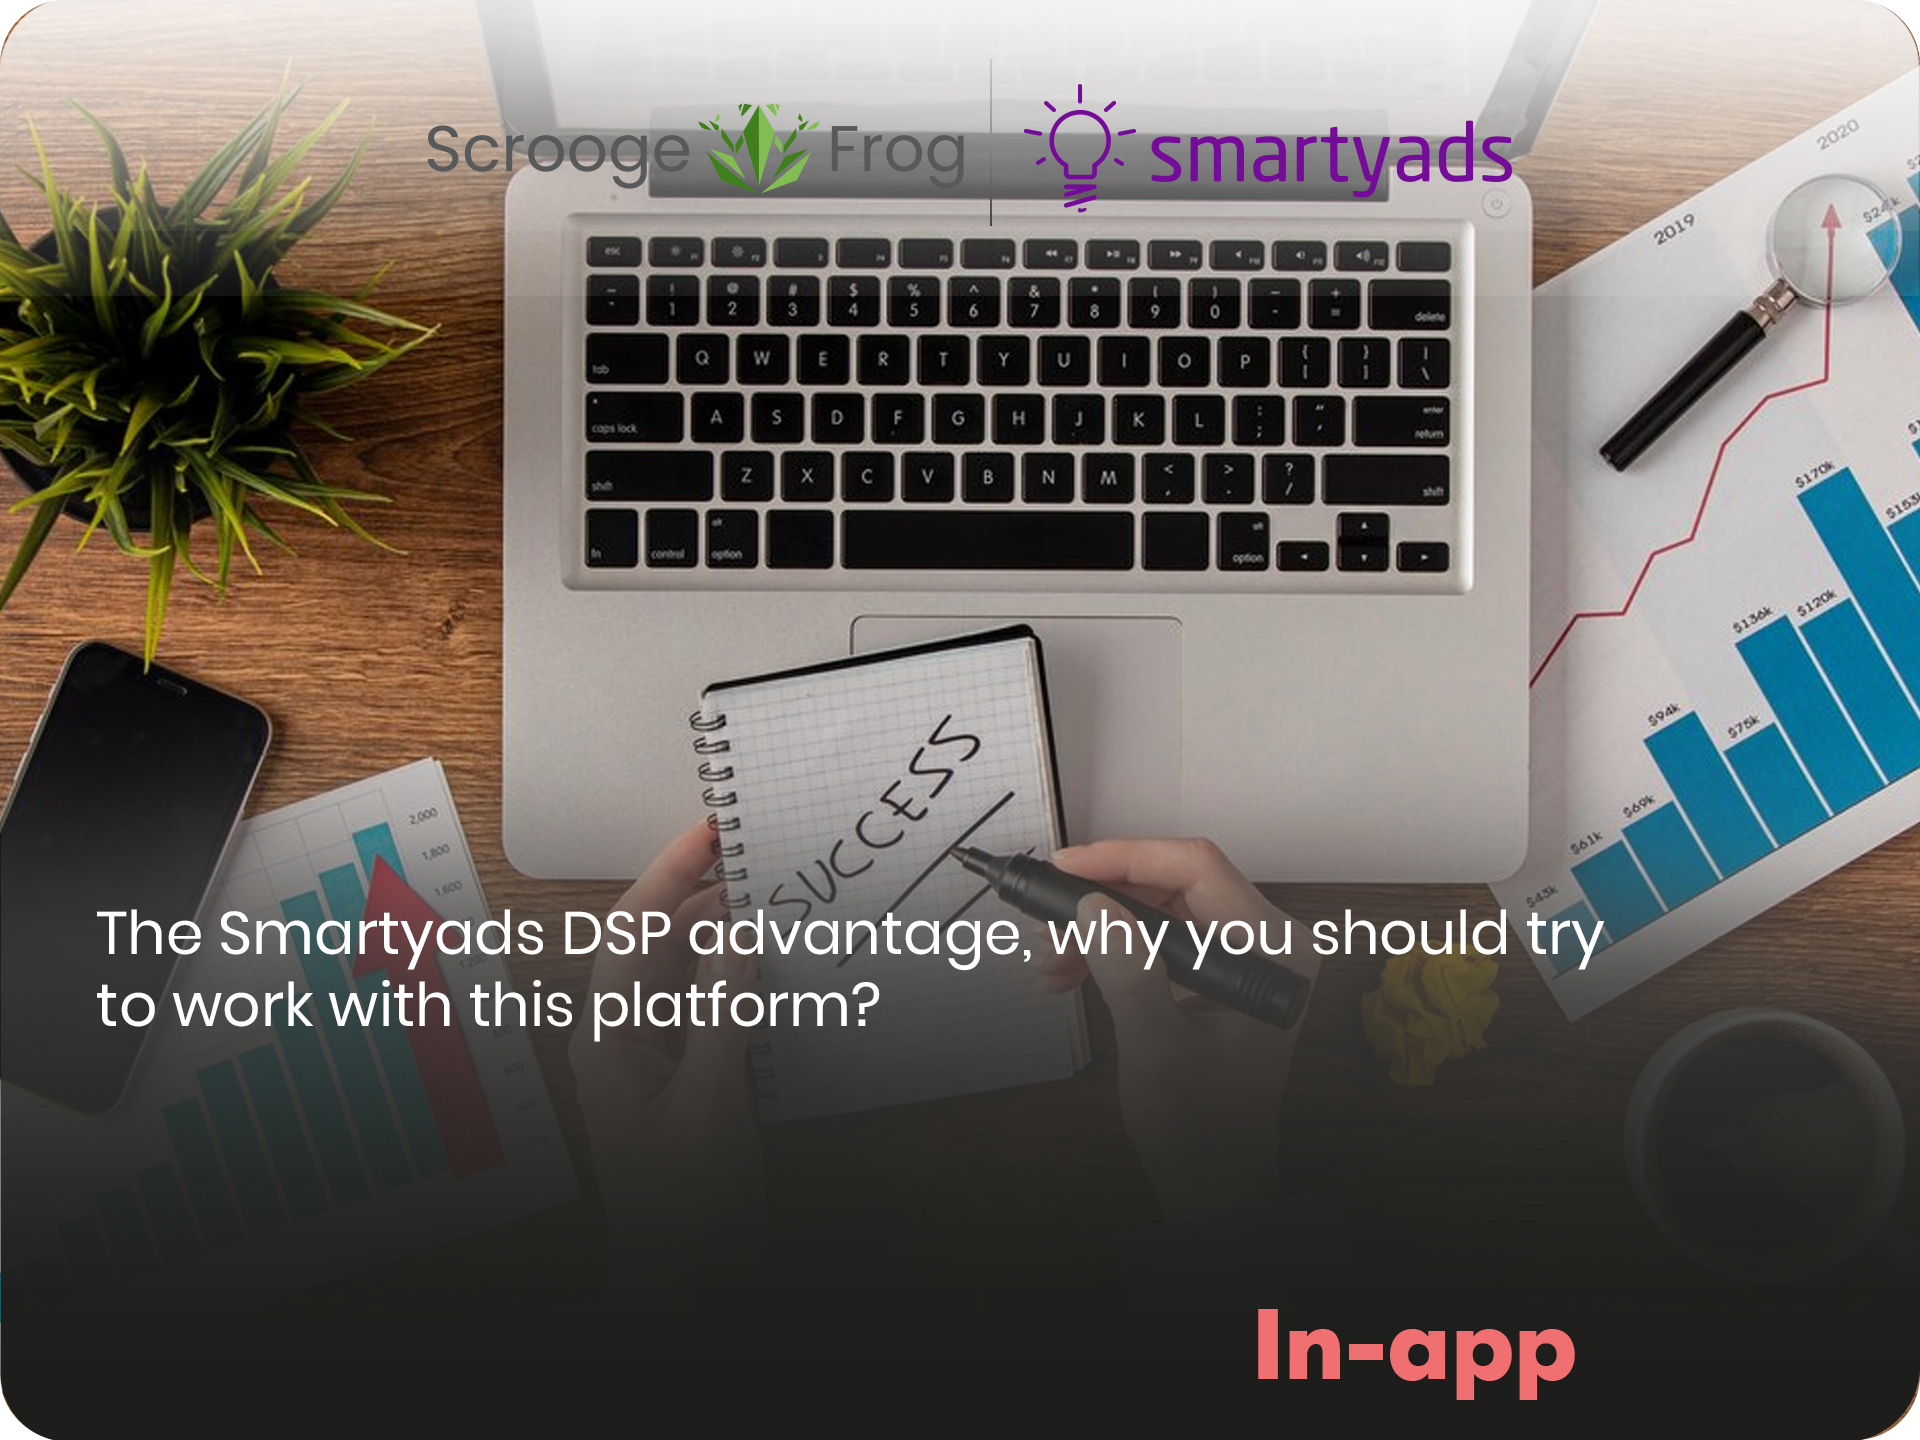 The Smartyads DSP advantage, why you should try to work with this platform?